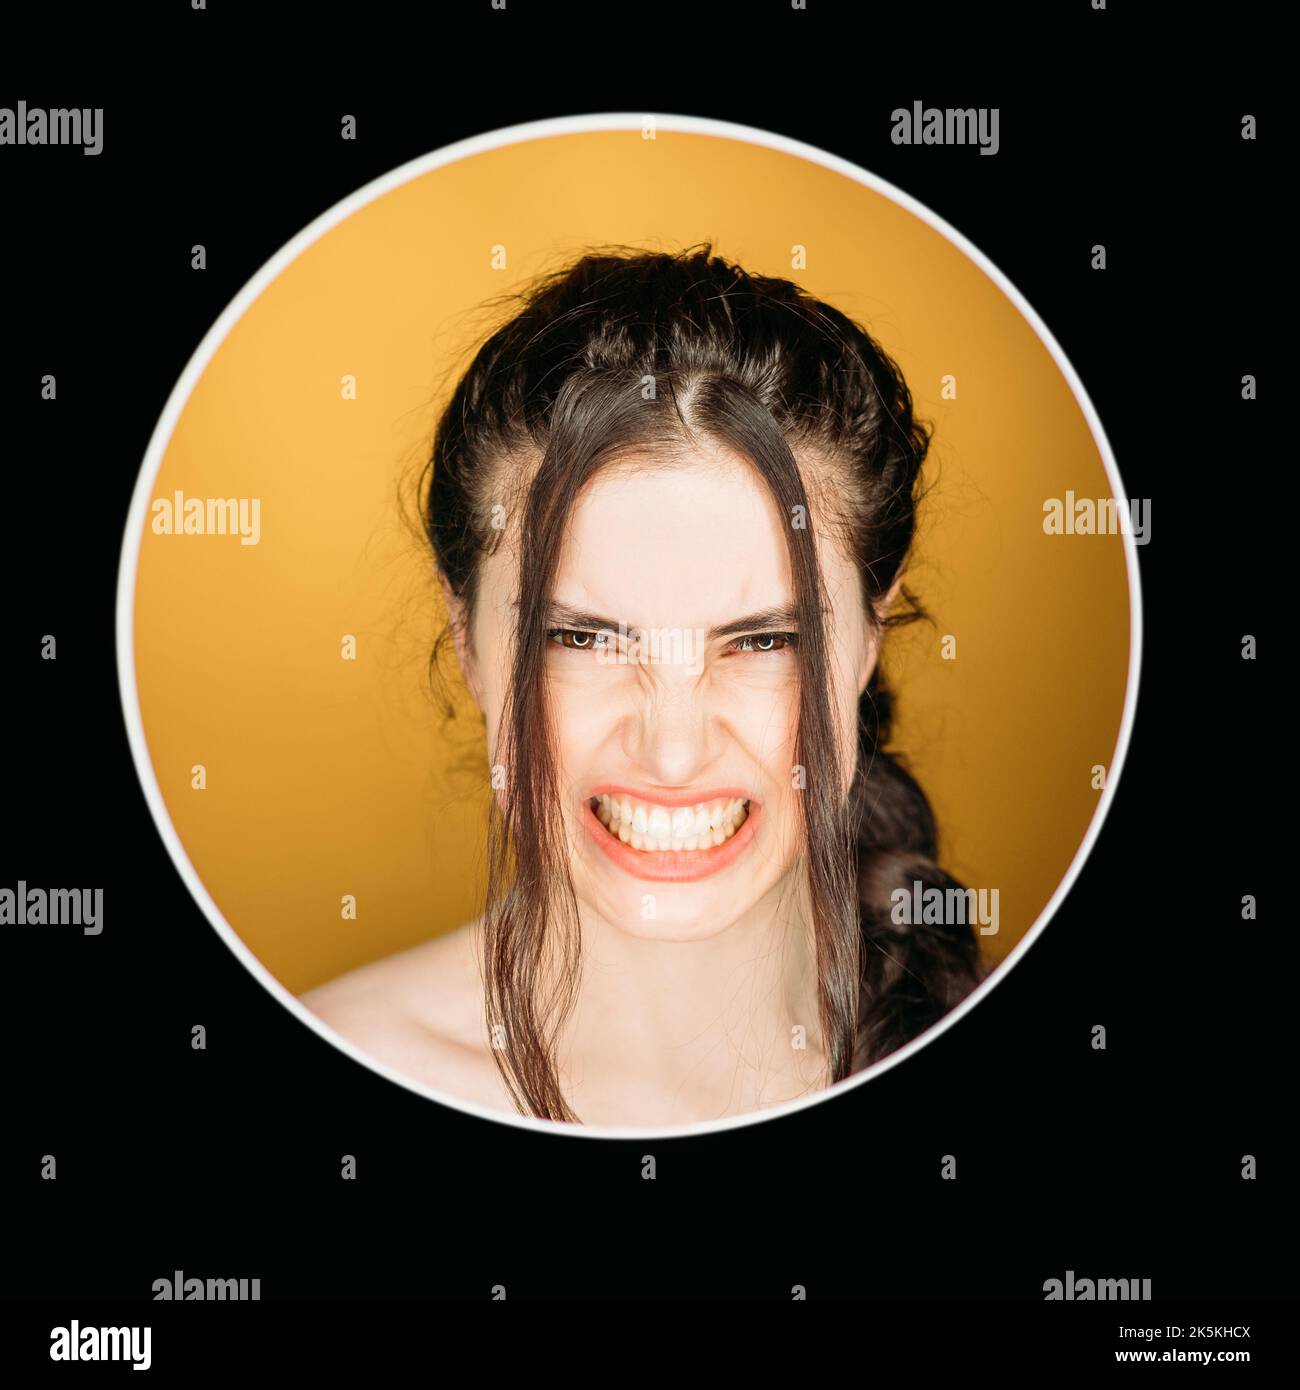 Angry woman. Anxiety frustration. Emotional crisis. Nervous breakdown. Headshot portrait of furious annoyed mad girl face isolated on orange in circle Stock Photo